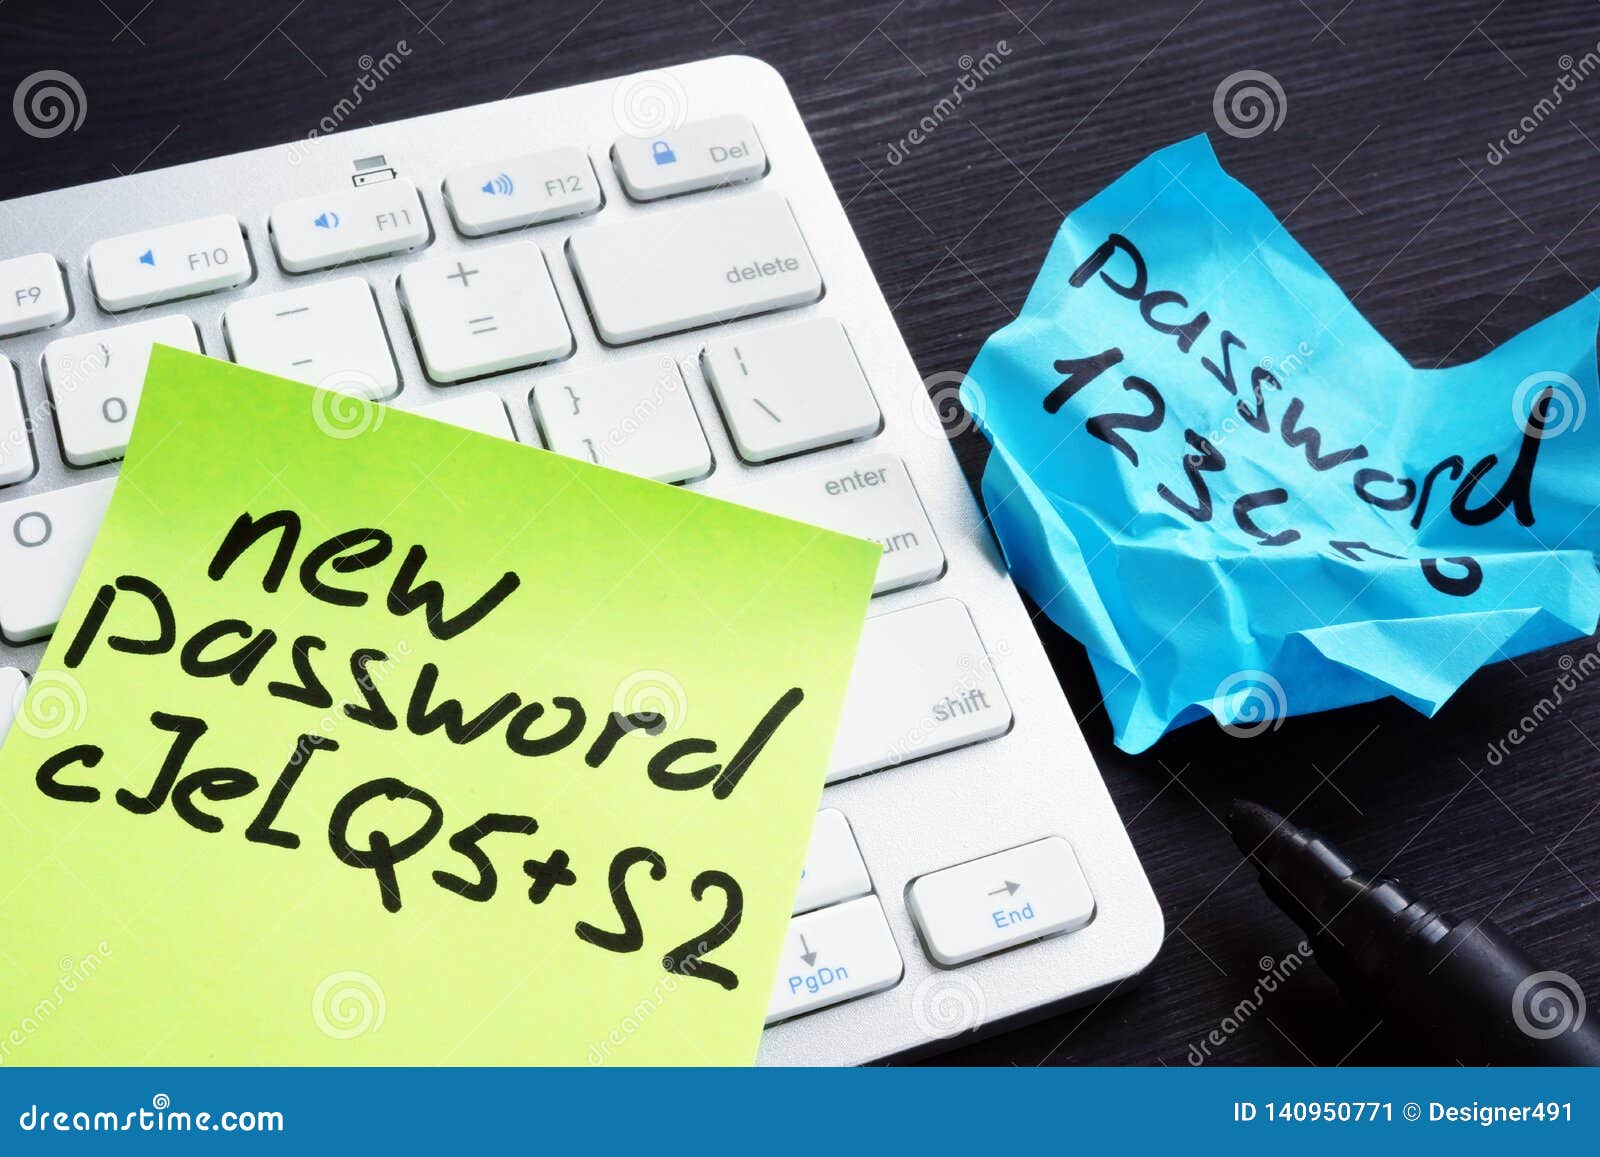 strong and weak password on pieces of paper. password security and protection